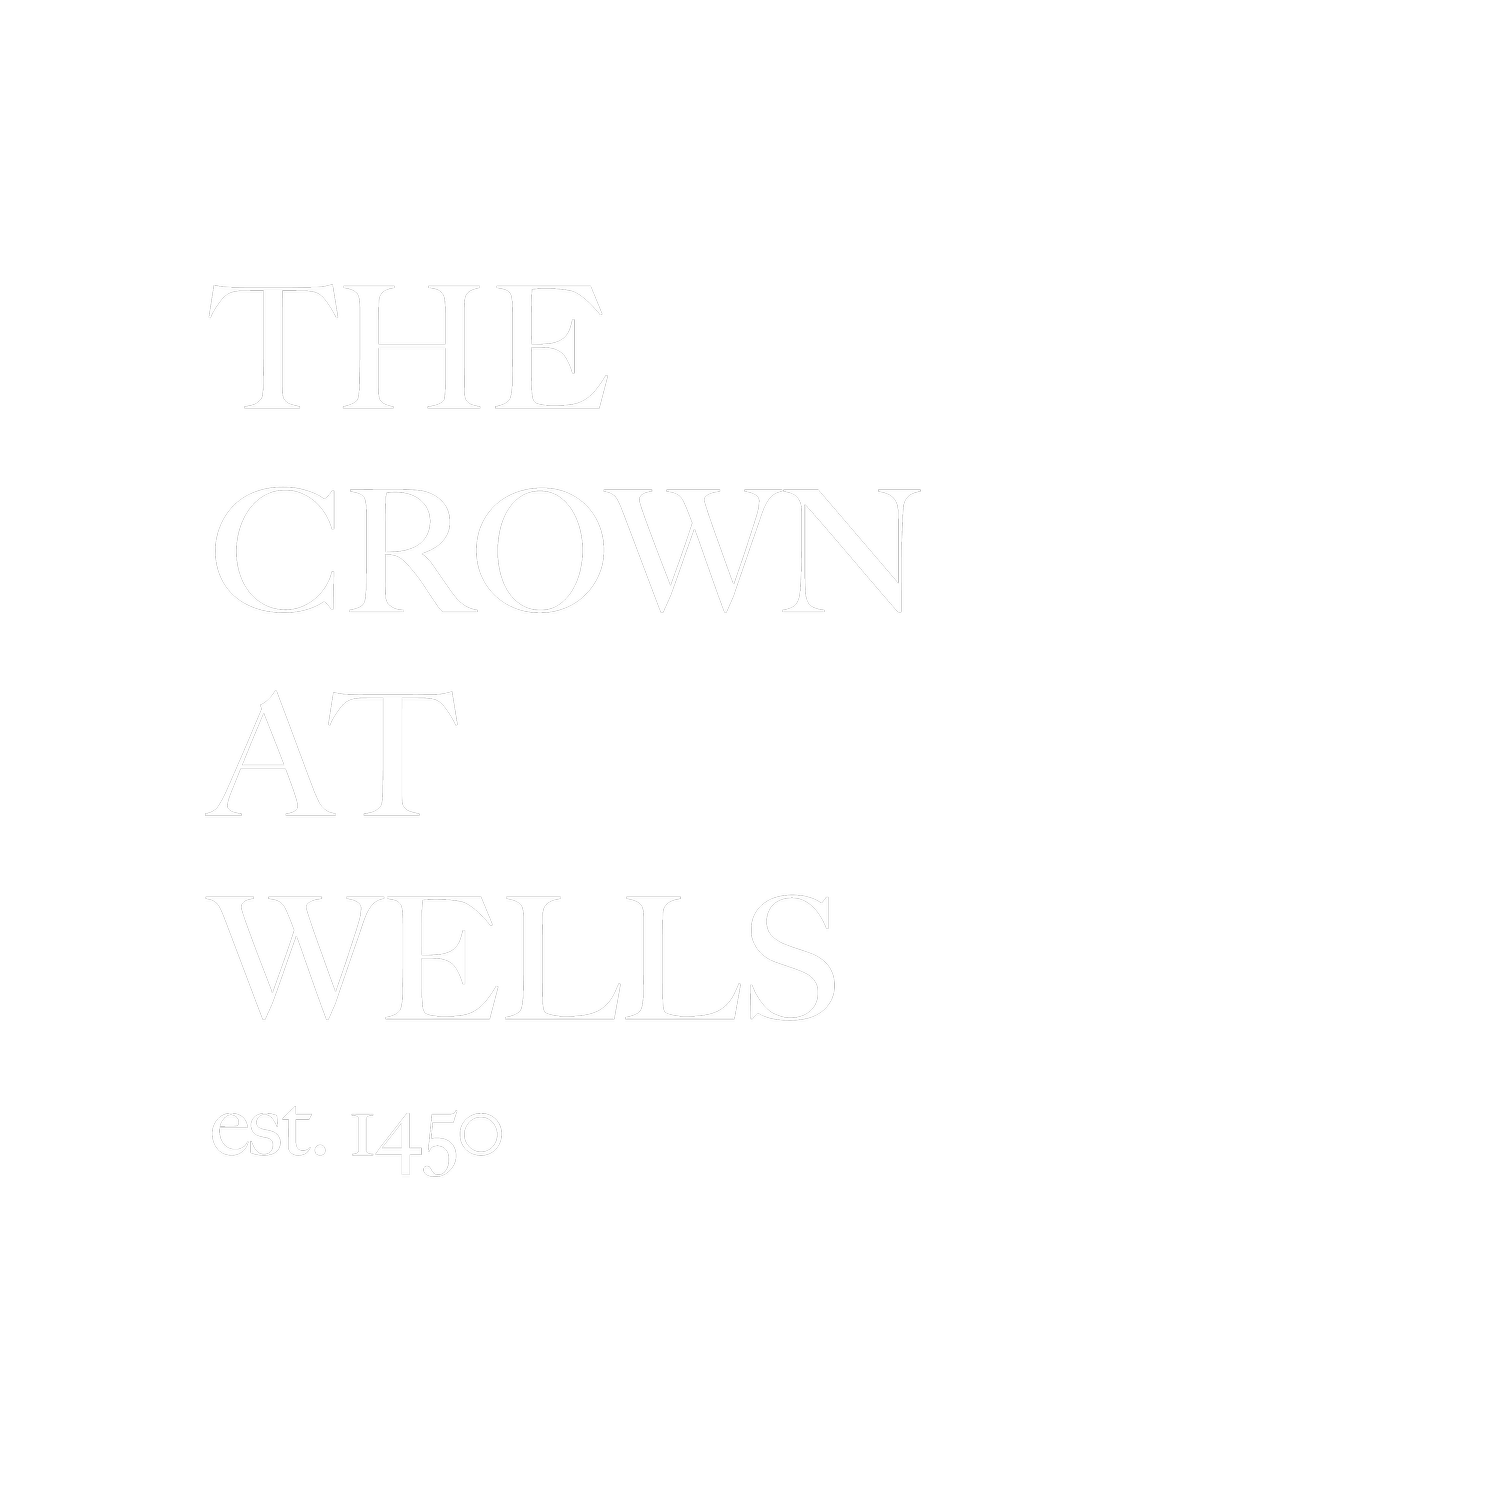 The Crown At Wells